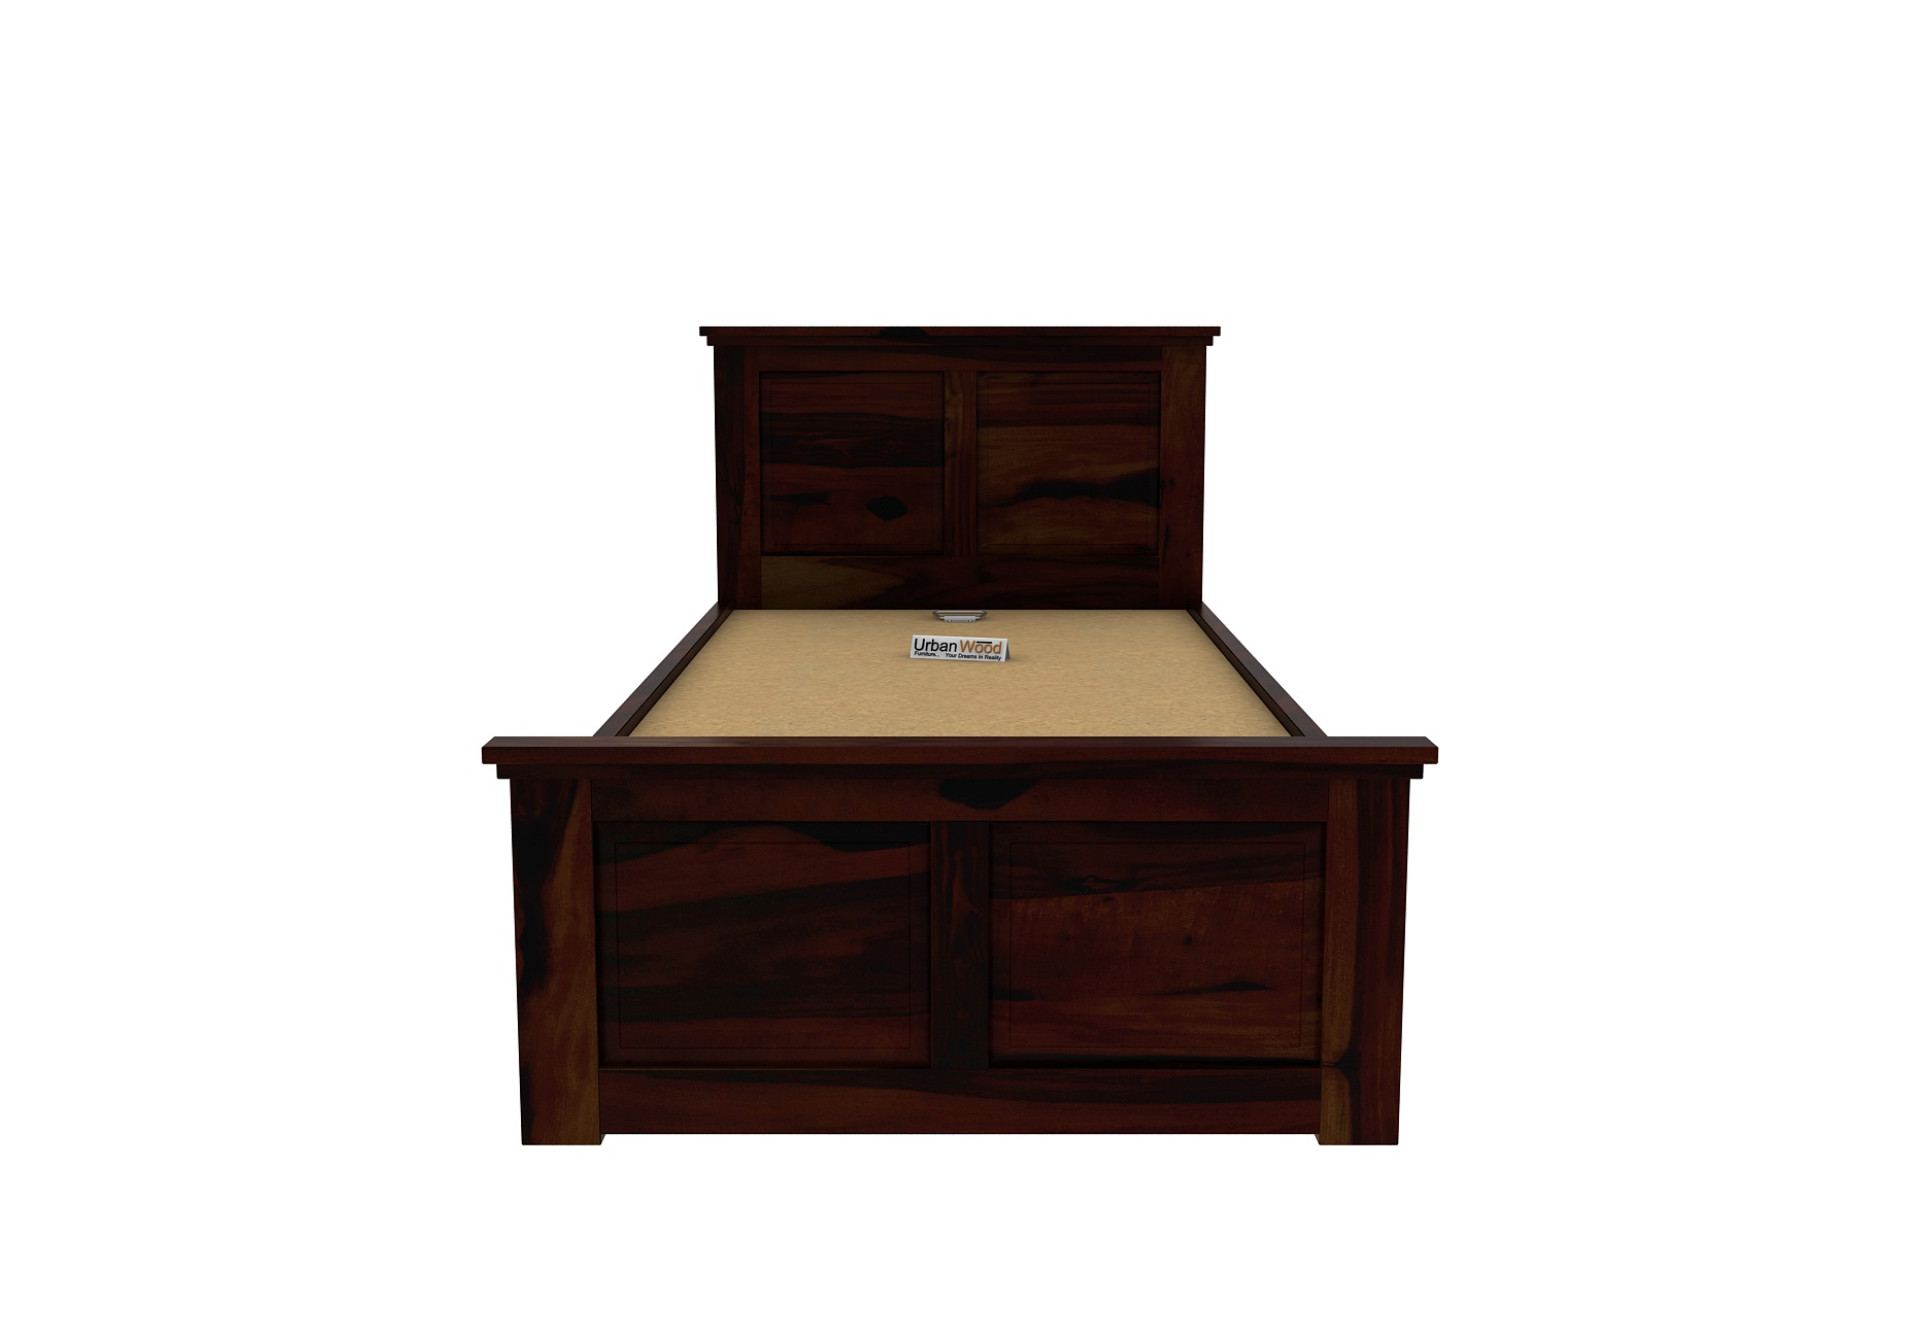 Babson Single Bed With Drawer Storage ( Walnut Finish )